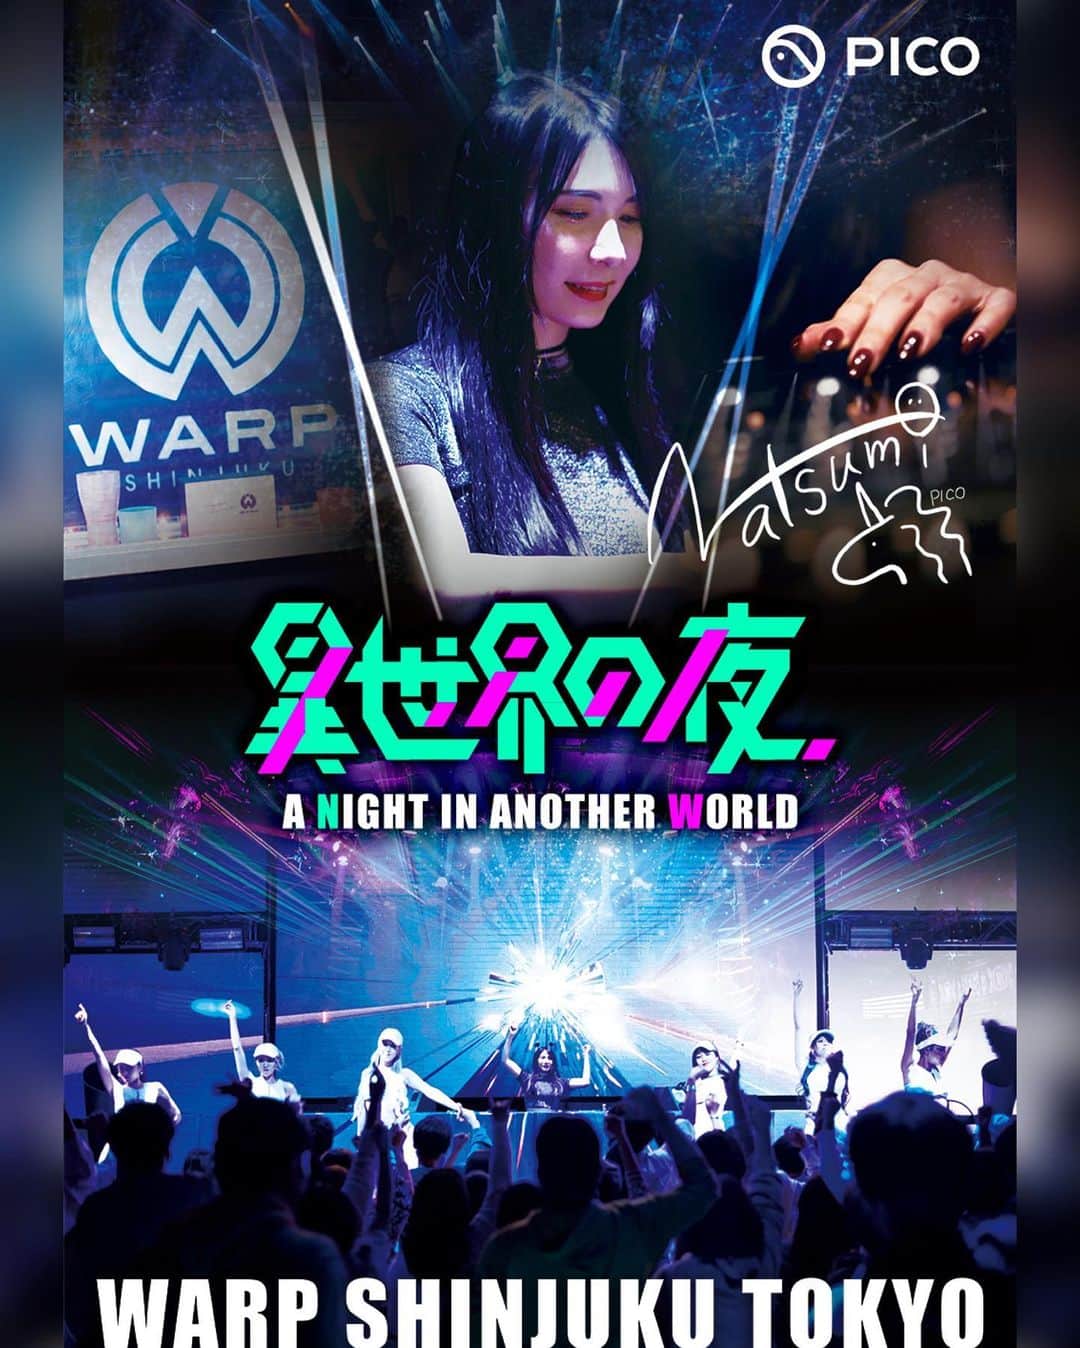 DJ NATSUMIのインスタグラム：「🦄Come see my DJ show in VR🦄  The all-in-one VR headset "PICO" allows you to experience a club at home! "A Night in Another World" released on April 7, and all the music played in this content is my music!  It has 360-degree, 4K + high resolution, so you can switch viewpoints to see the floor, DJ booth and even VIP seats up close!  Check it out guys :)  @picoxr_japan @picoxr @warp_shinjuku   .」